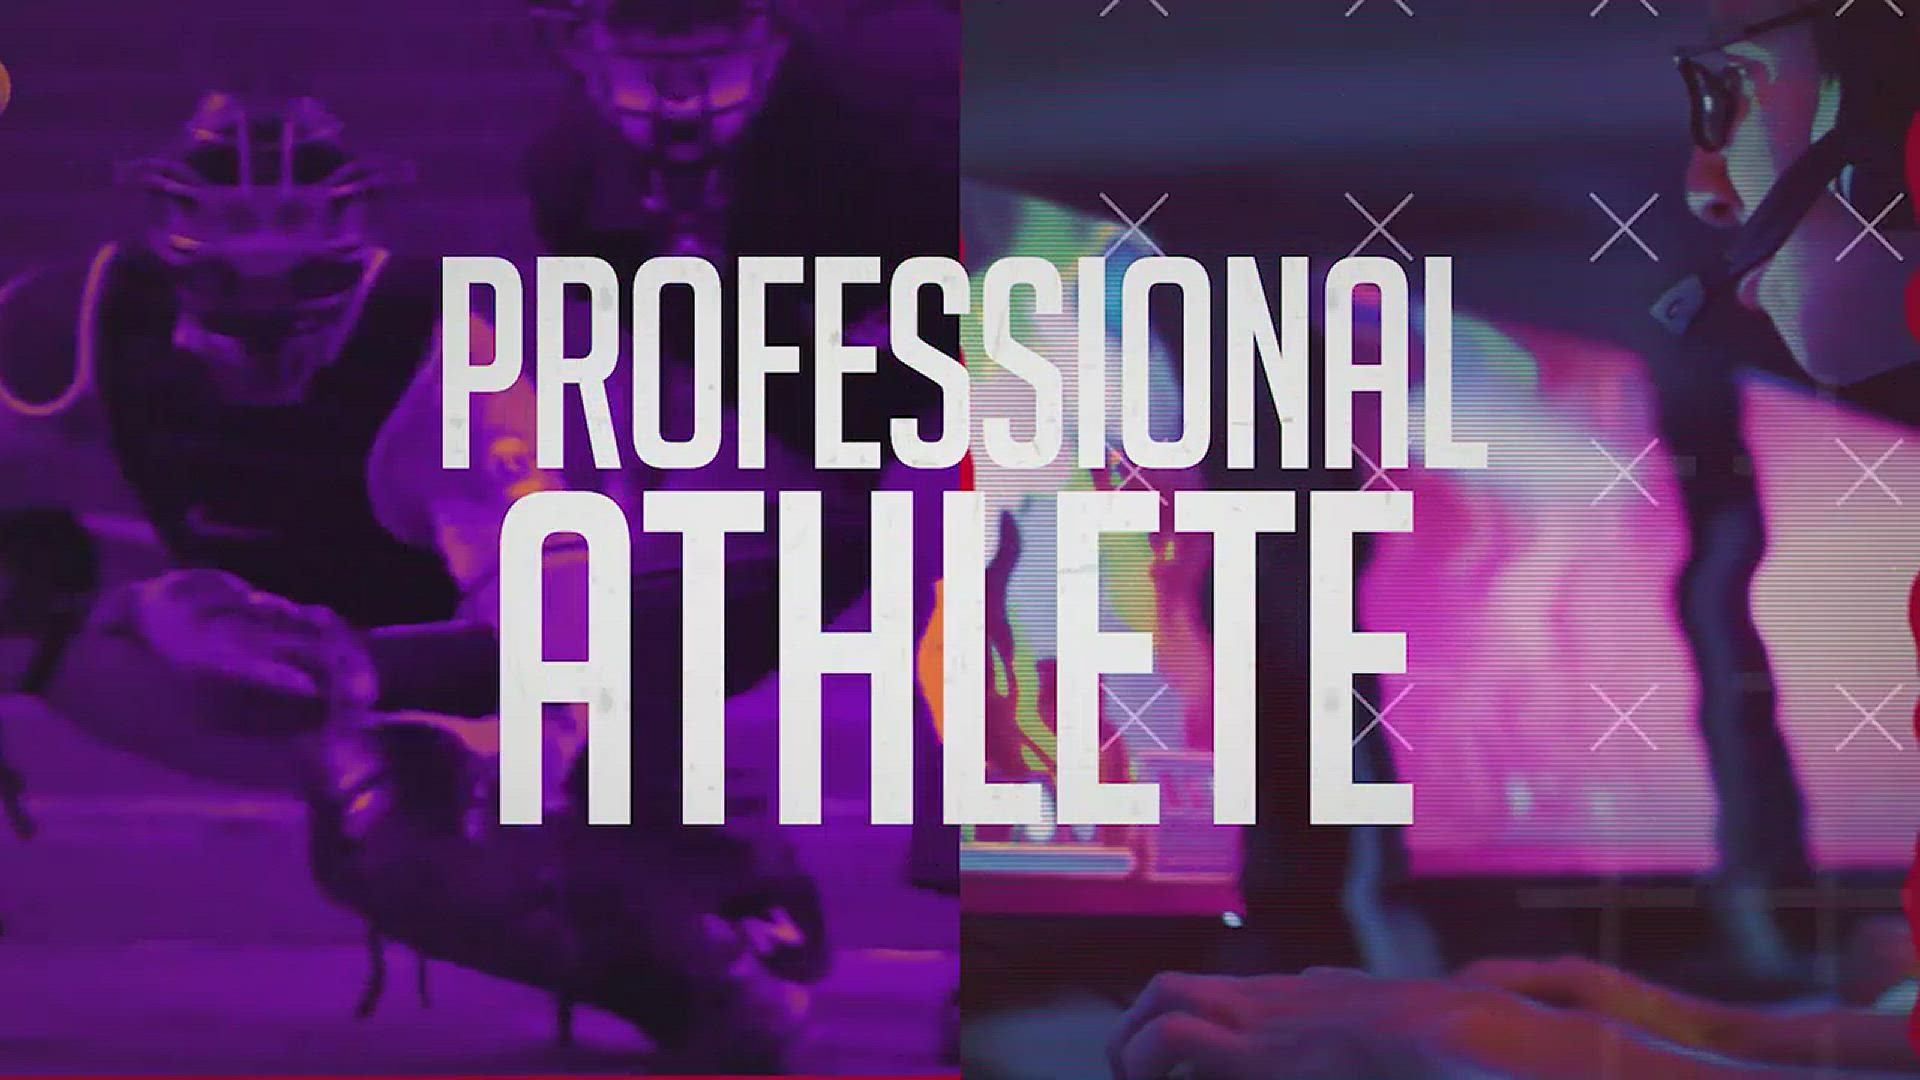 These are the nominees for outstanding professional athlete, which is present by Truist.